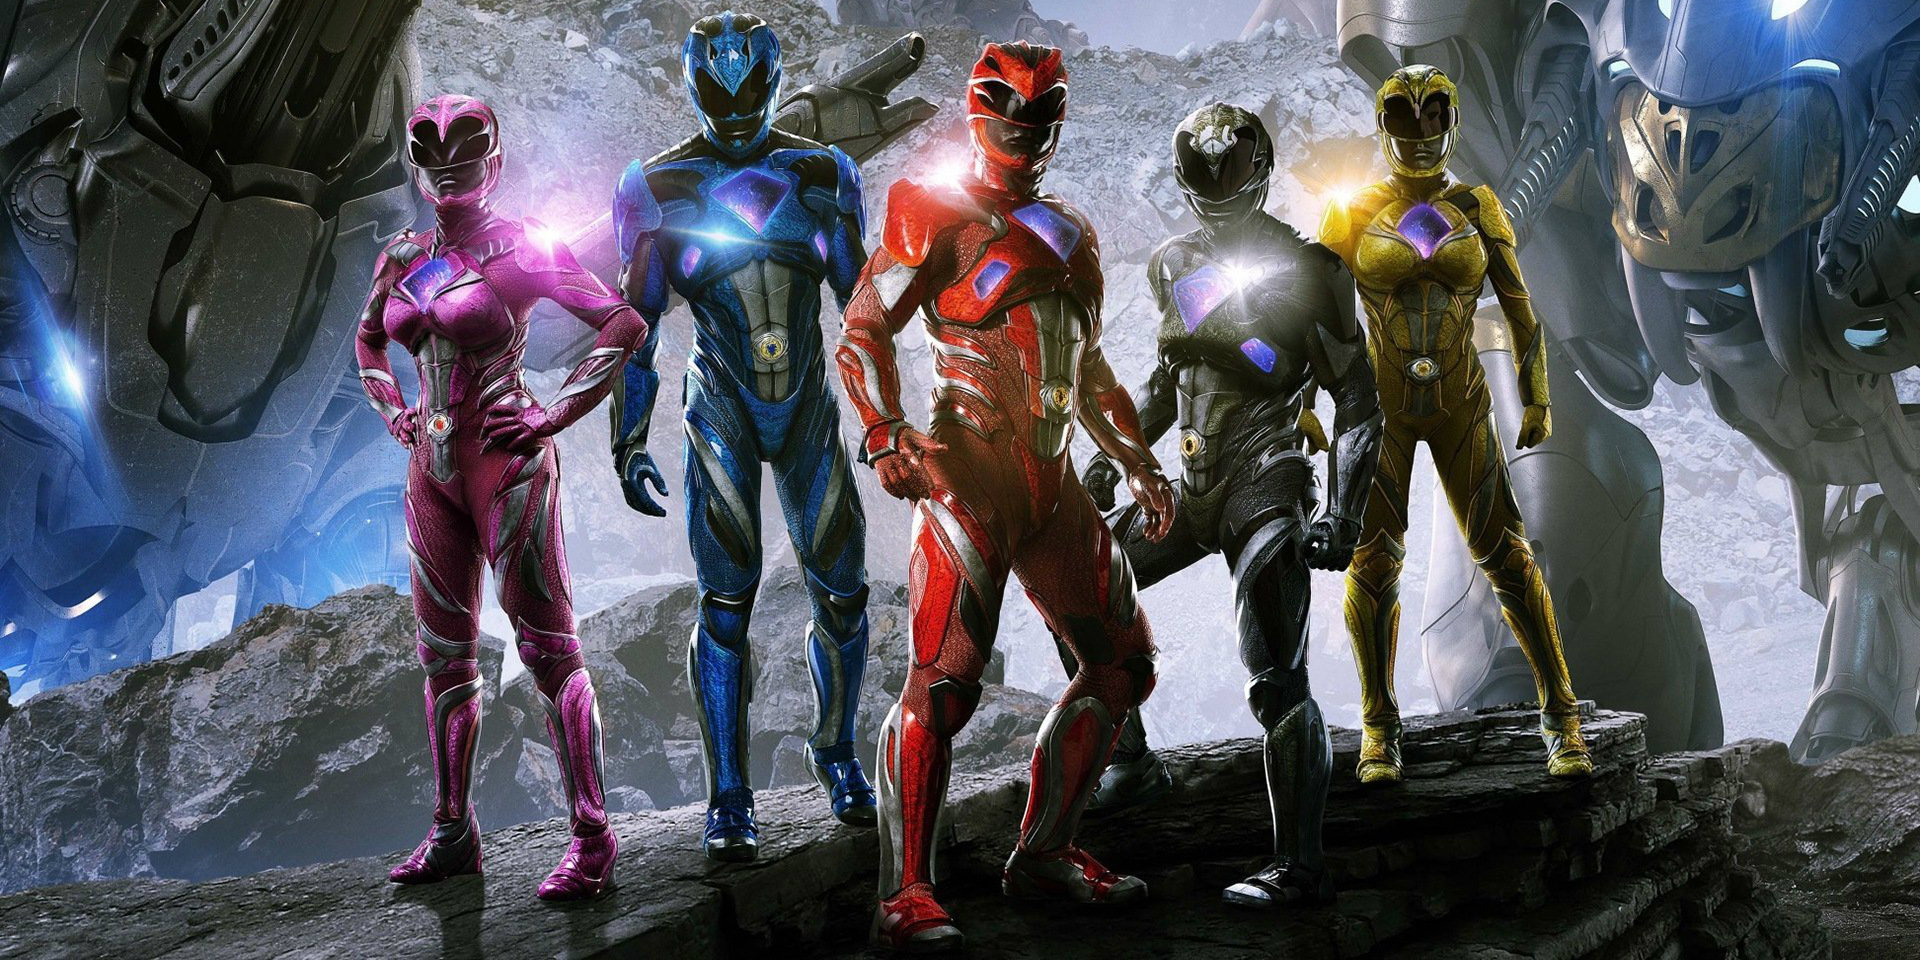 ‘Power Rangers’ doesn’t quite have a grasp on what it is or who it’s for